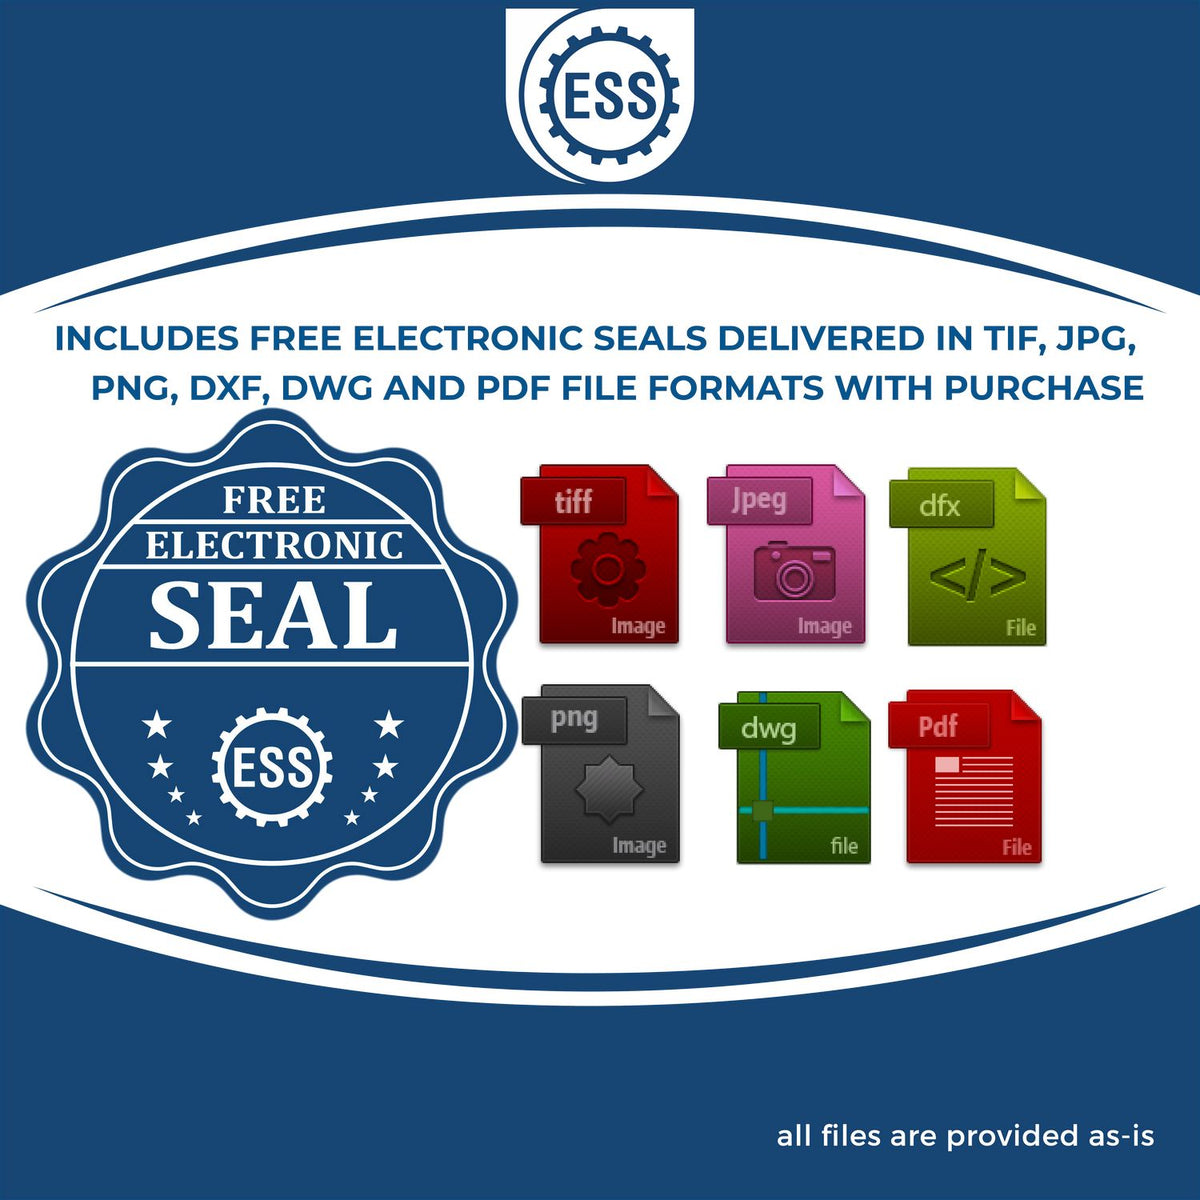 An infographic for the free electronic seal for the Soft Connecticut Professional Geologist Seal illustrating the different file type icons such as DXF, DWG, TIF, JPG and PNG.